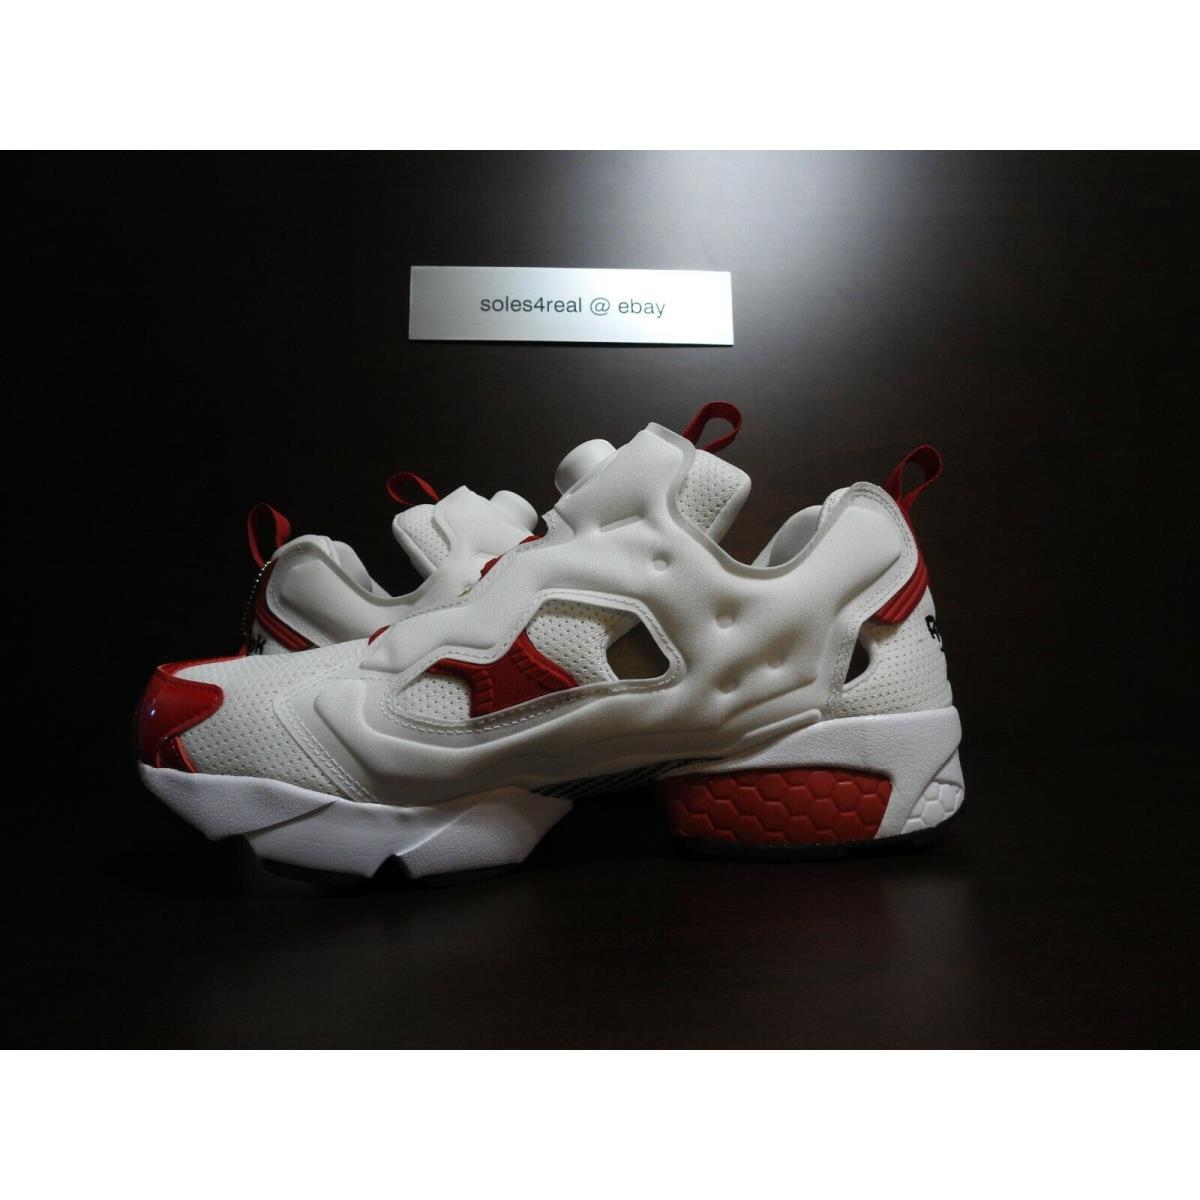 Nike DS Reebok Insta Pump Fury Icons Size 9 The Question Allen Iverson  White Red | 883212486233 - Nike shoes air max - white | SporTipTop